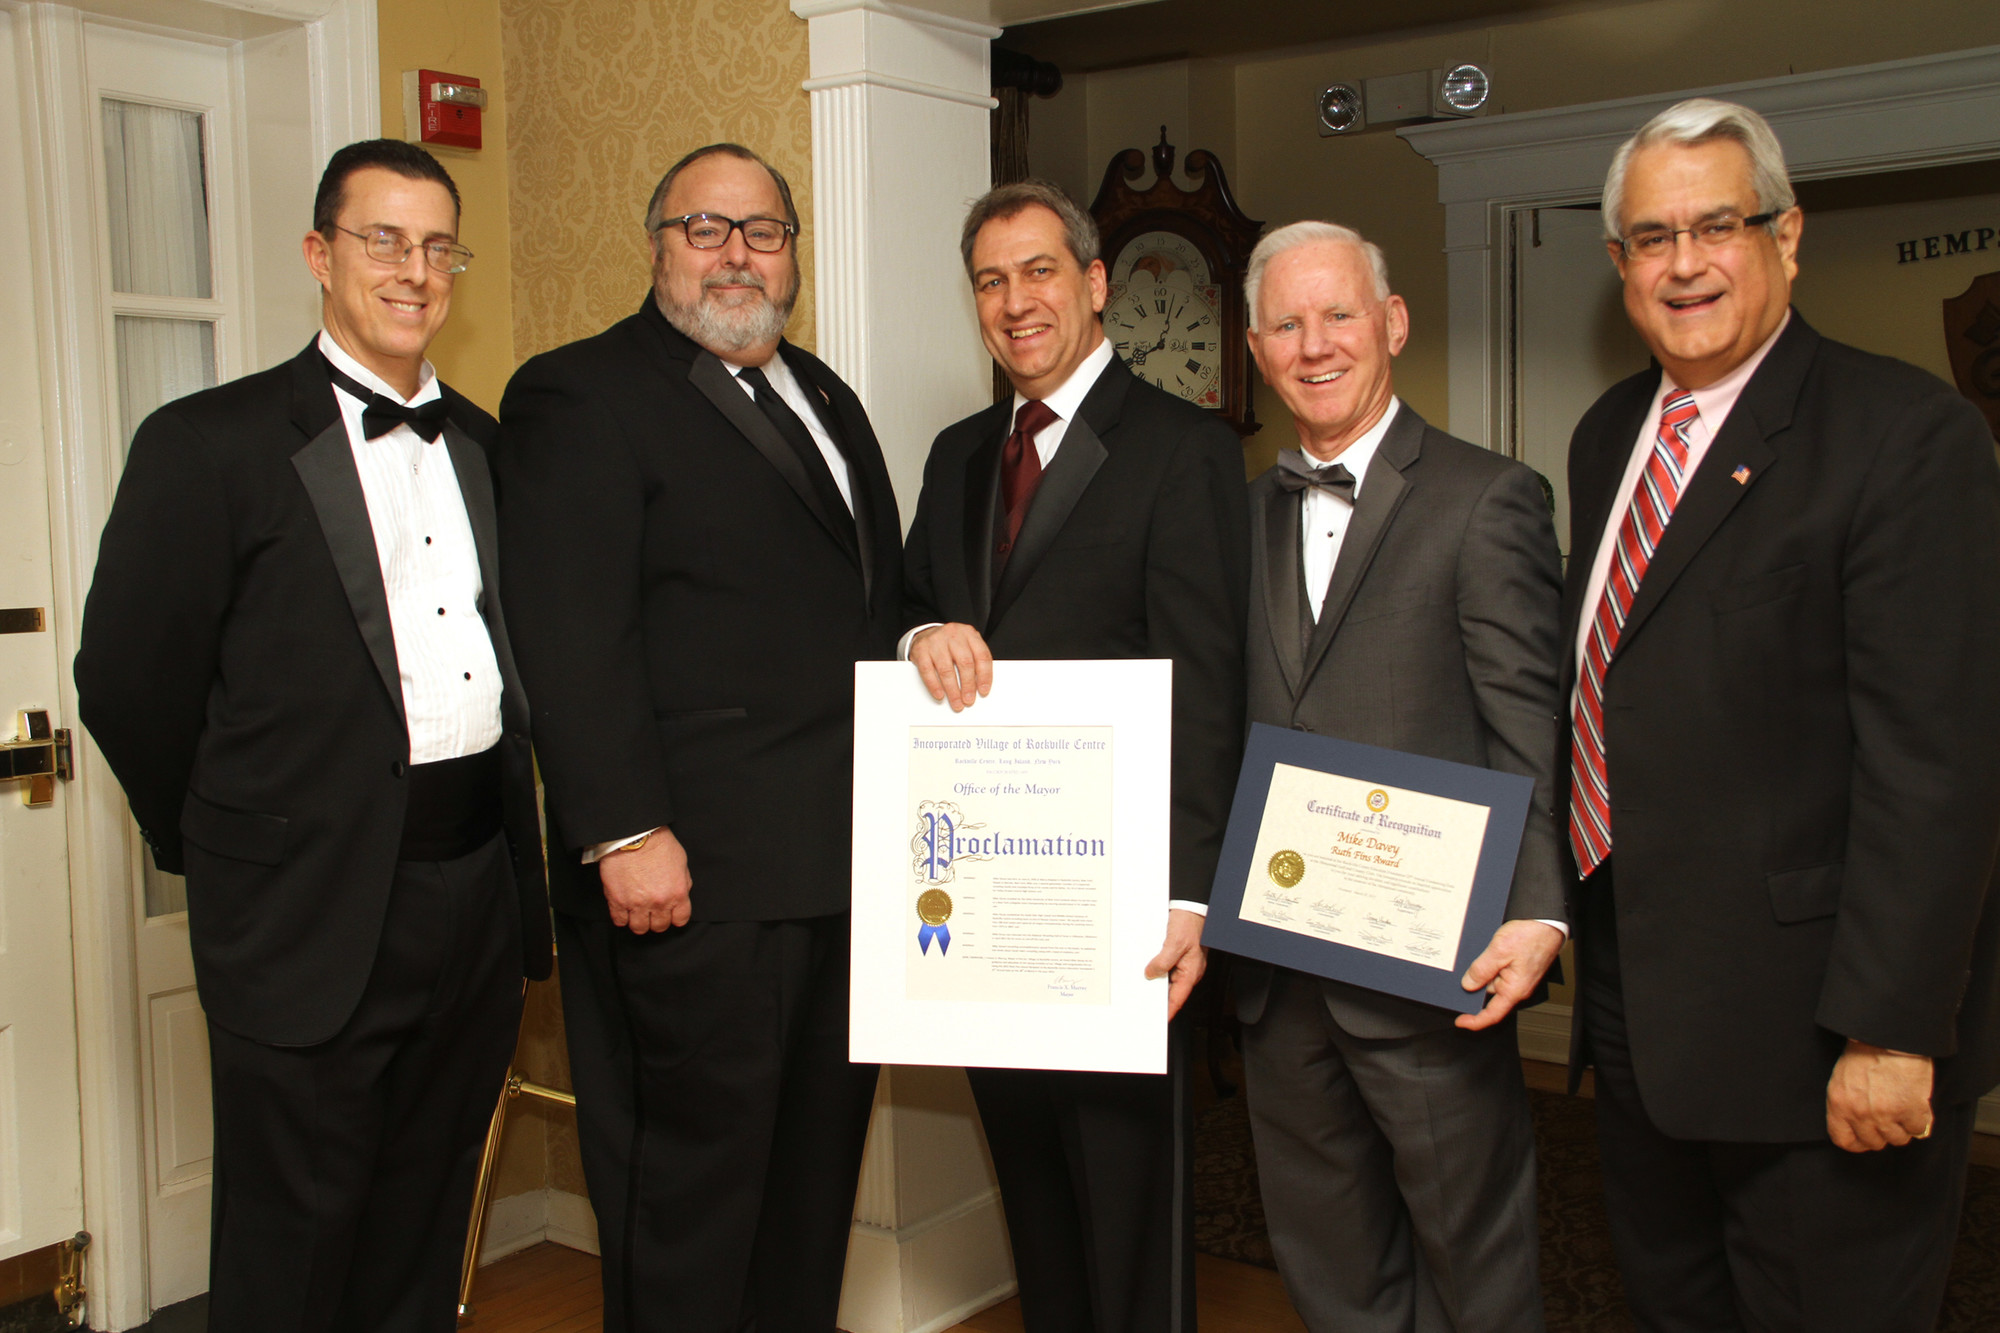 Honorees Dr. Drew Bogner, center, and Mike Davey, second from right, were congratulated by Education Foundation President Joel Ditchik, left, Rockville Centre Mayor Francis X. Murray, and Town of Hempstead Councilman Tony Santino.